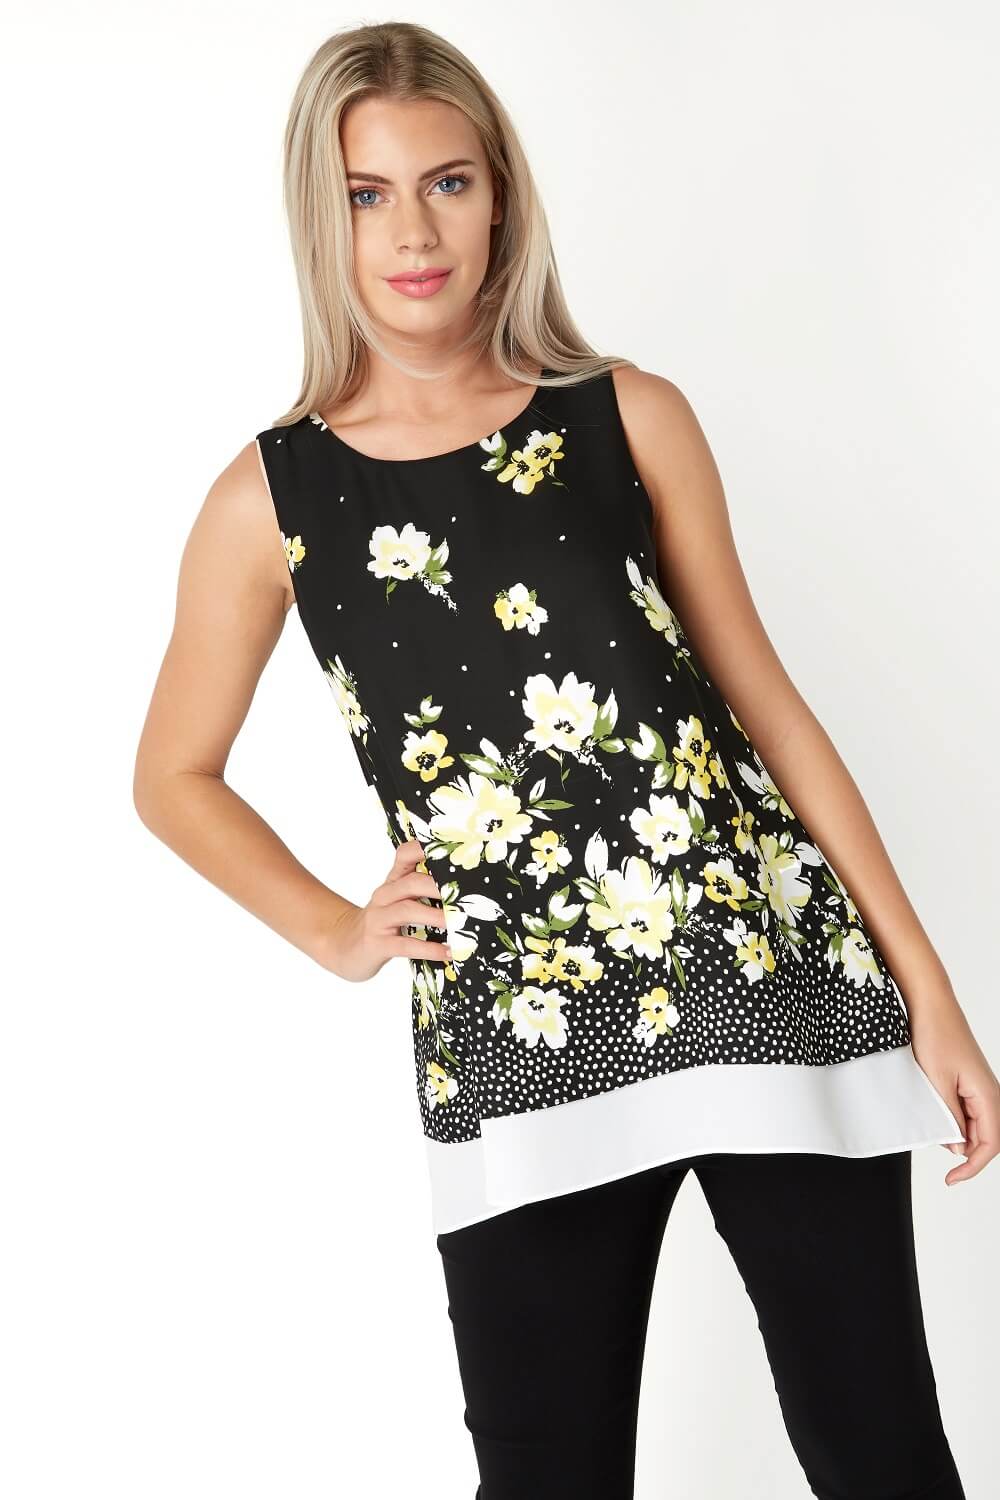 Black Floral Print Overlay Top, Image 2 of 8